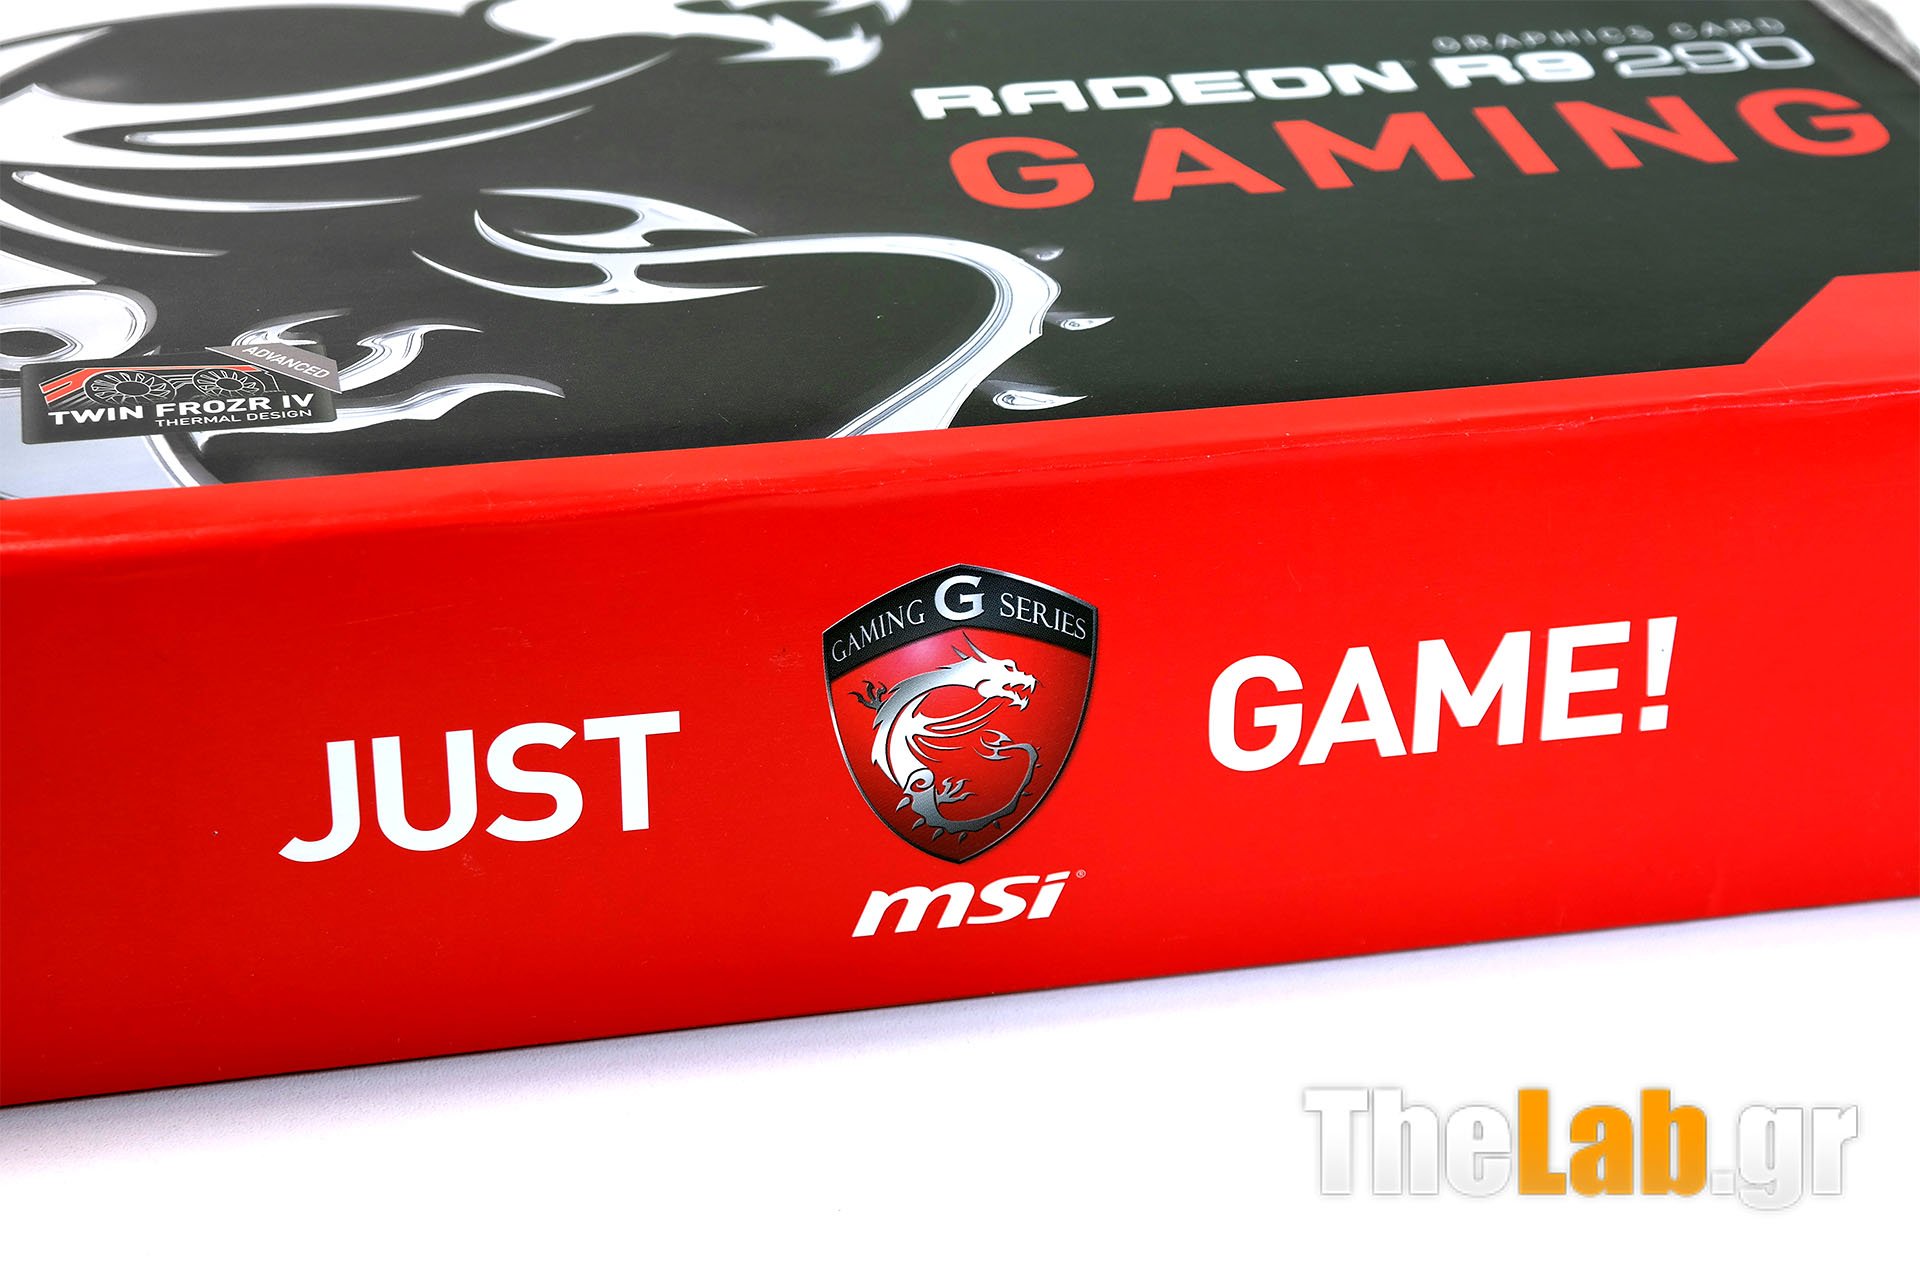 More information about "Review MSI Radeon R9 290 GAMING 4G"